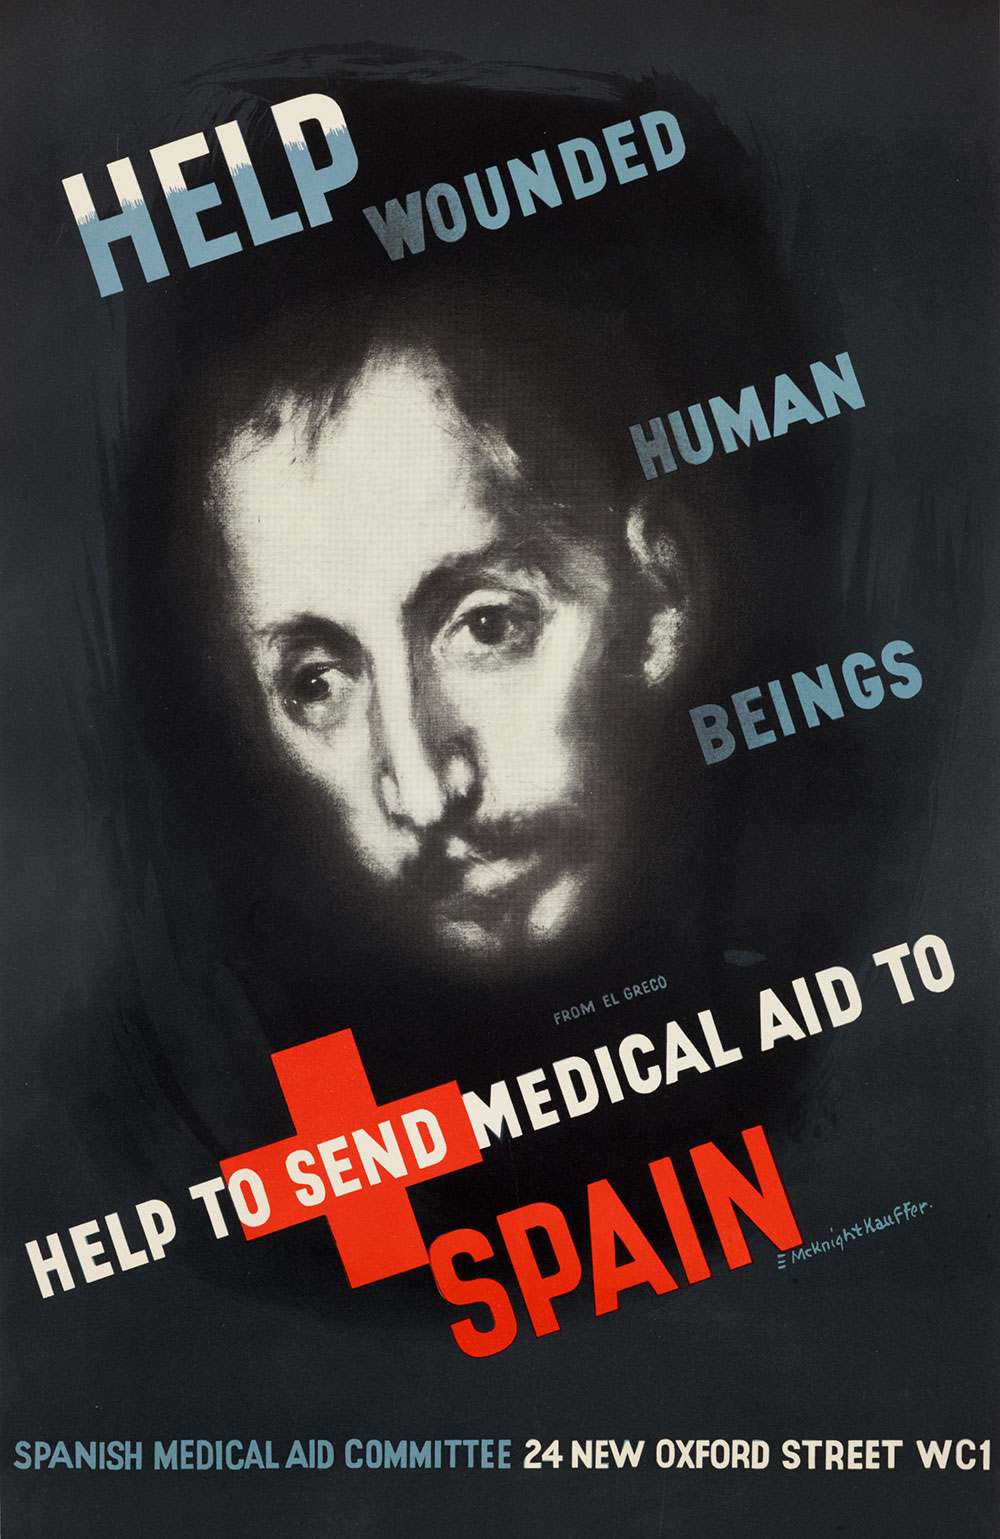 Poster depicting a glowing head which resembles El Greco's Saint Luke surrounded by white and blue text asking for medical aid